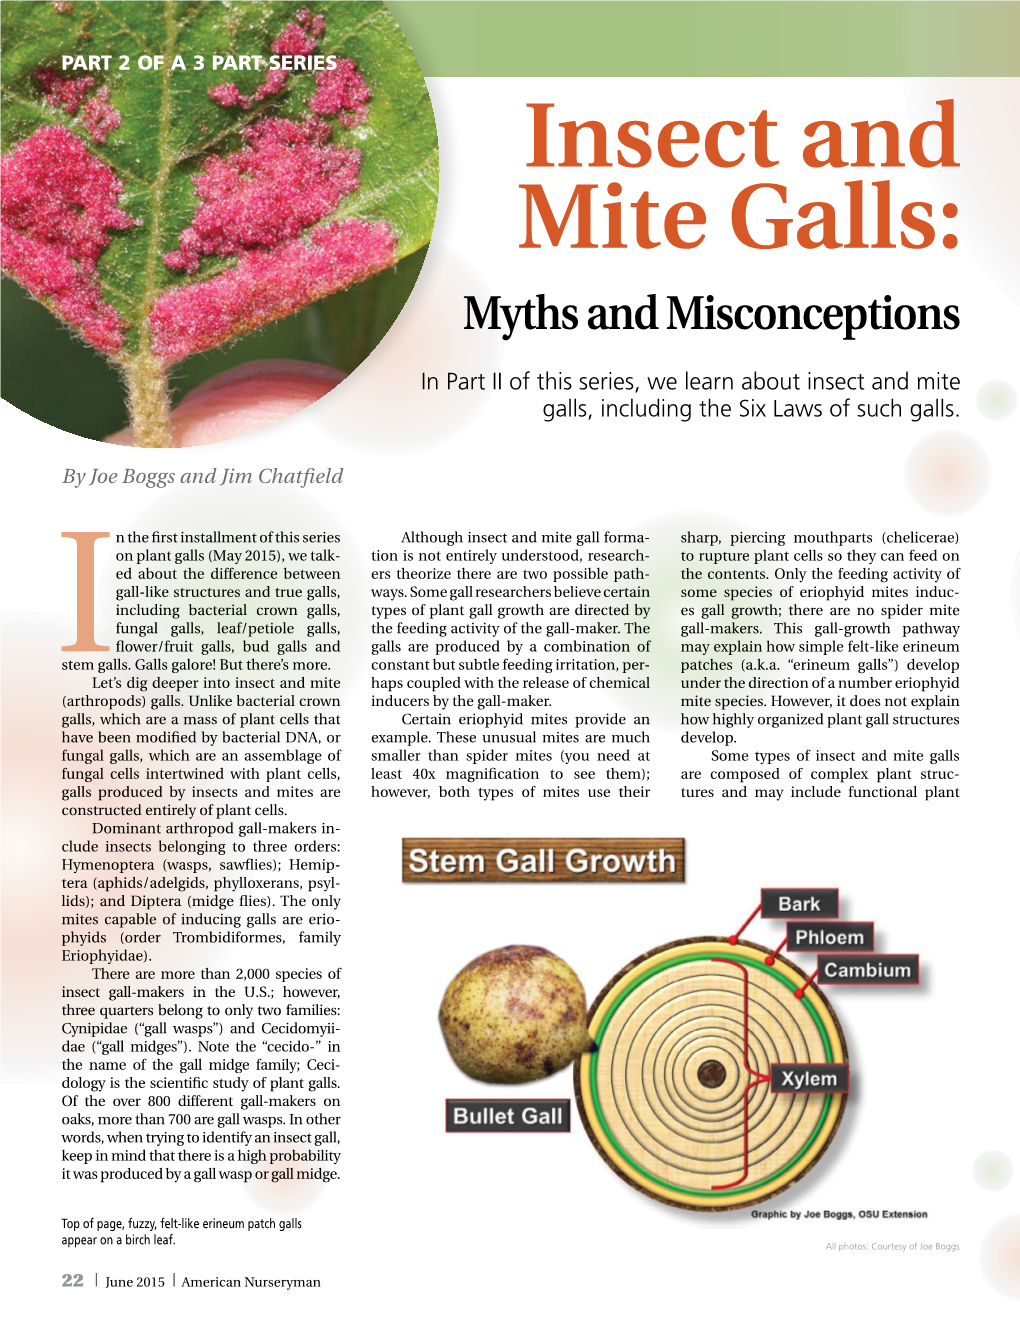 Insect and Mite Galls: Myths and Misconceptions